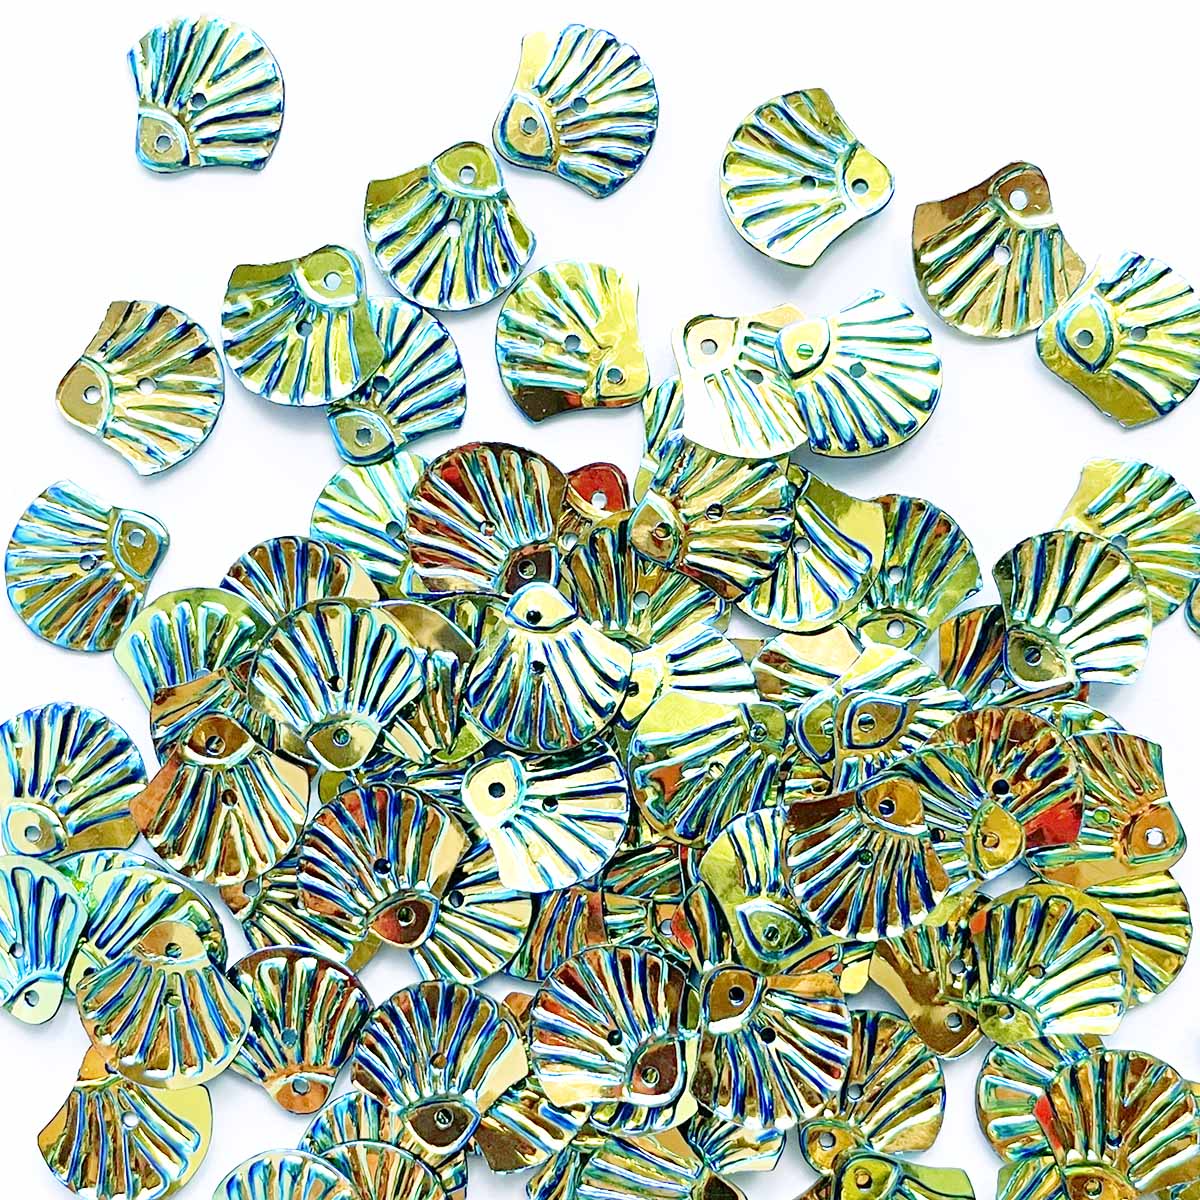 www.colourstreams.com.au Colour Streams Embellishments Stitching Embroidery Australia Canada USA NZ Costumes Sequins Fan Shells 13mm Gold Blue Green Lights S244